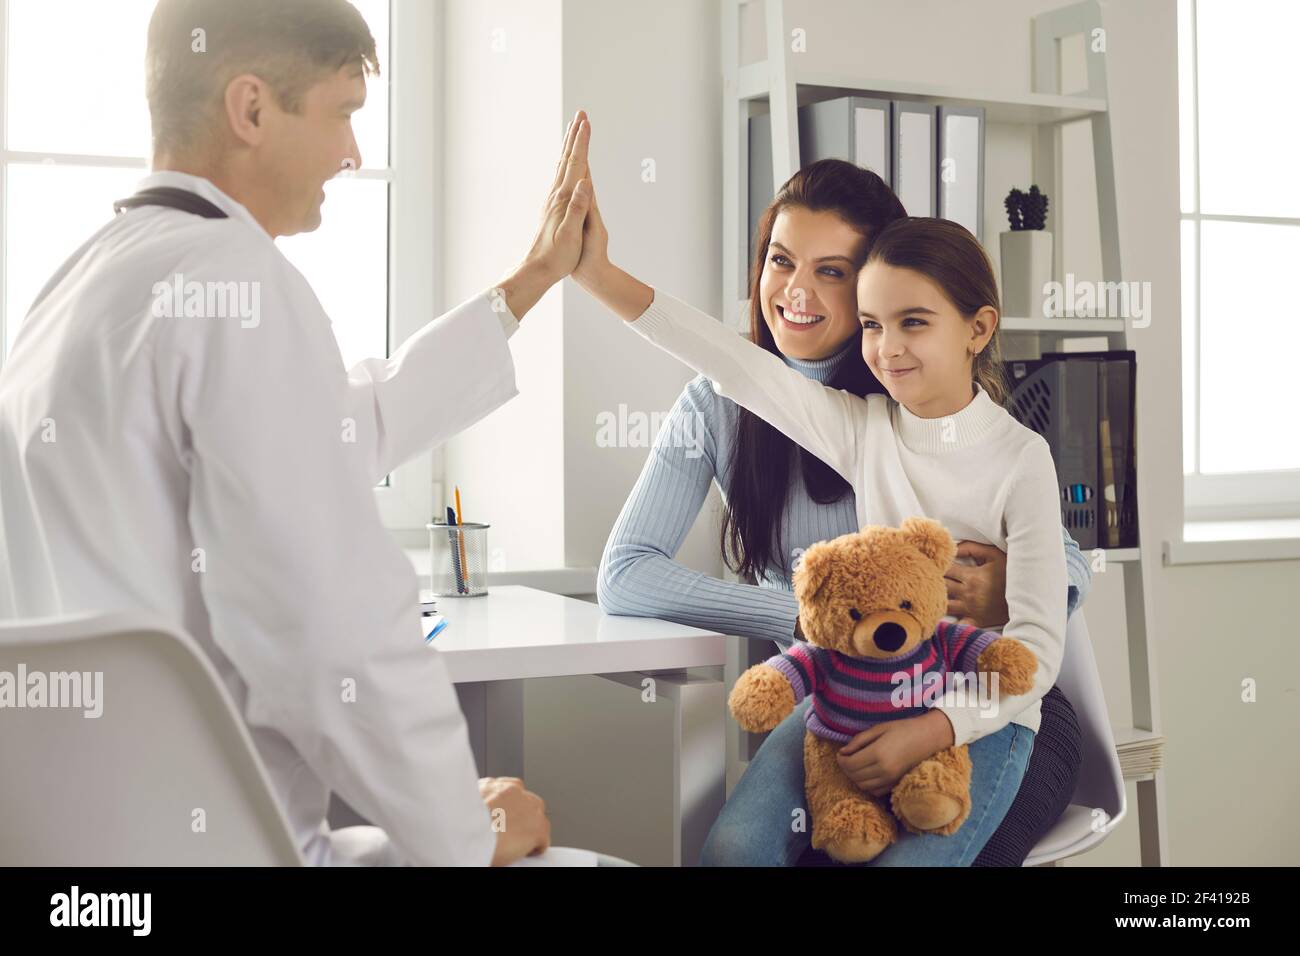 Happy little girl patient gives five smiling male pediatrician after medical examination. Stock Photo